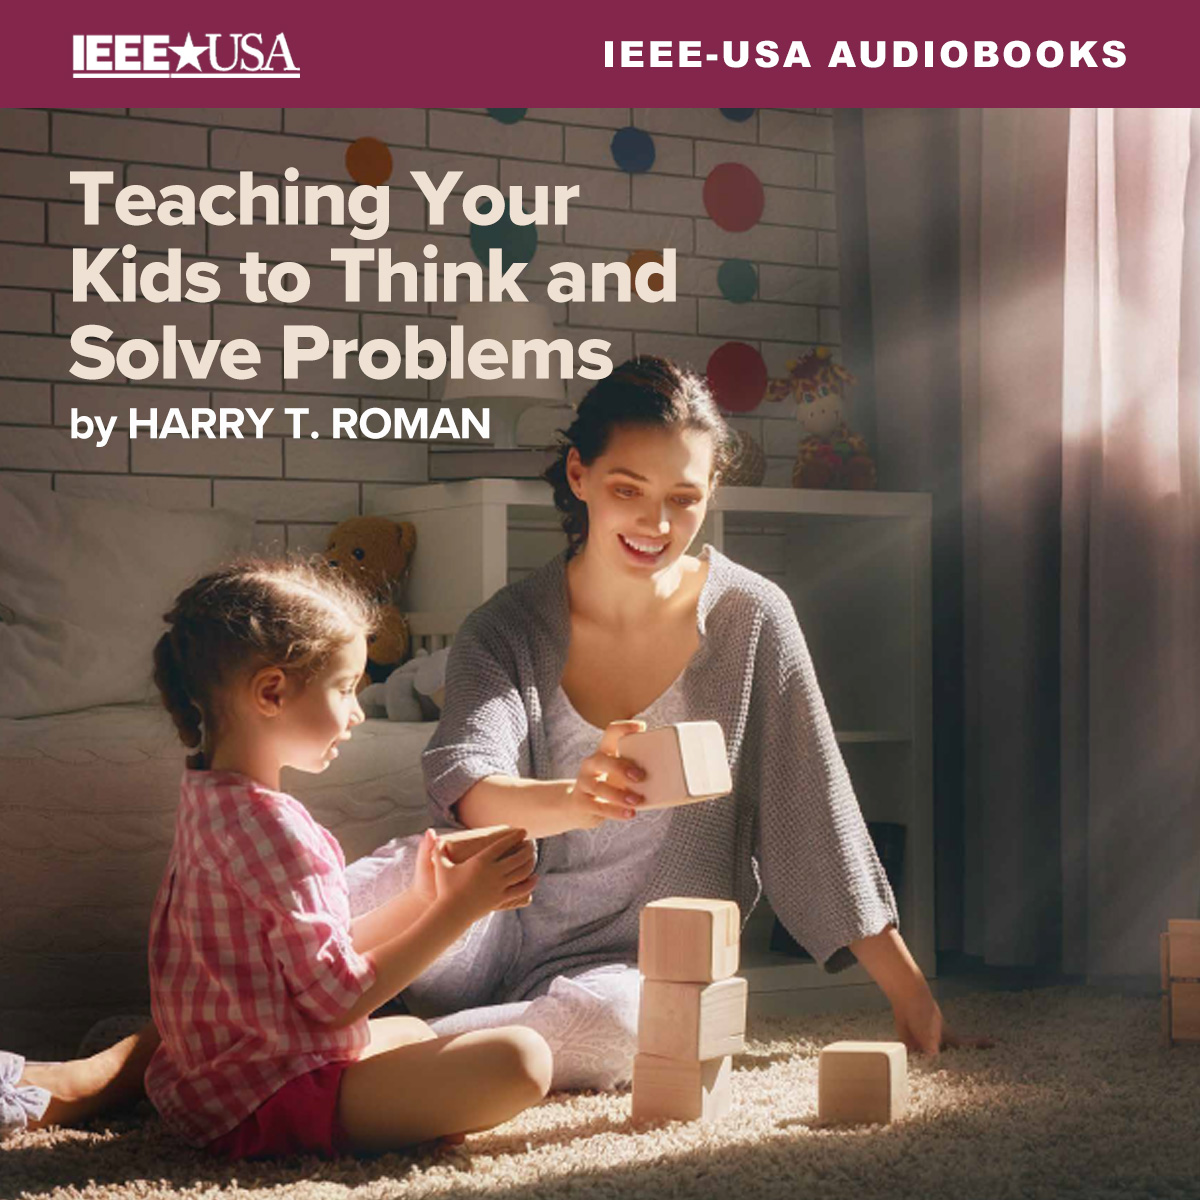 Audiobook: Teaching Your Kids to Think and Solve Problems